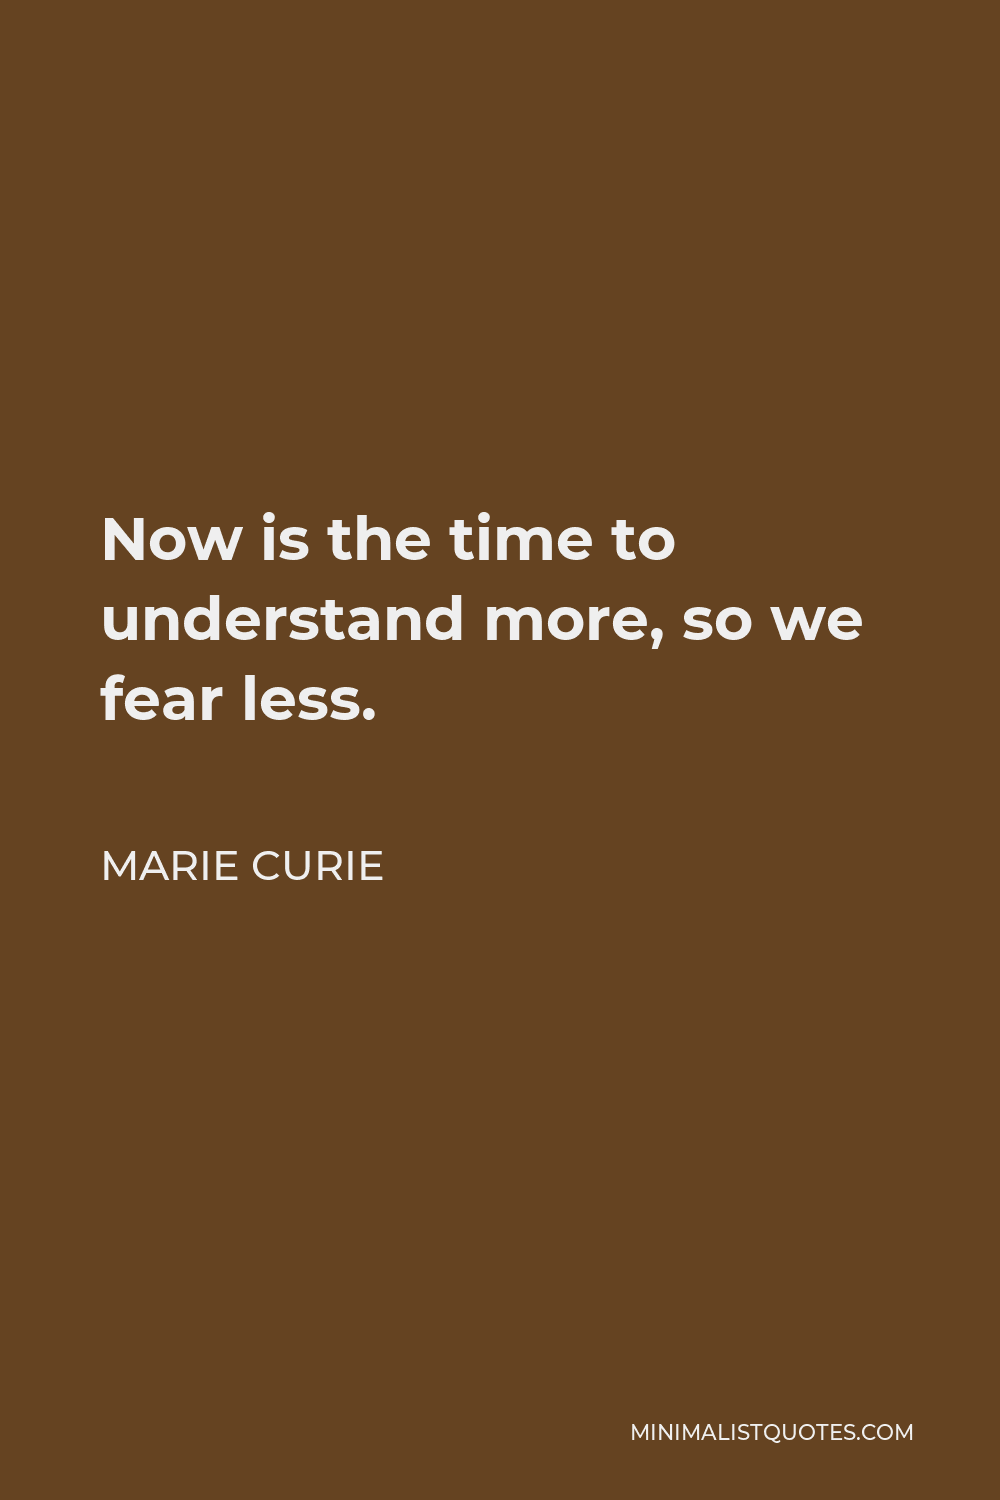 Marie Curie Quote - Now is the time to understand more, so we fear less.